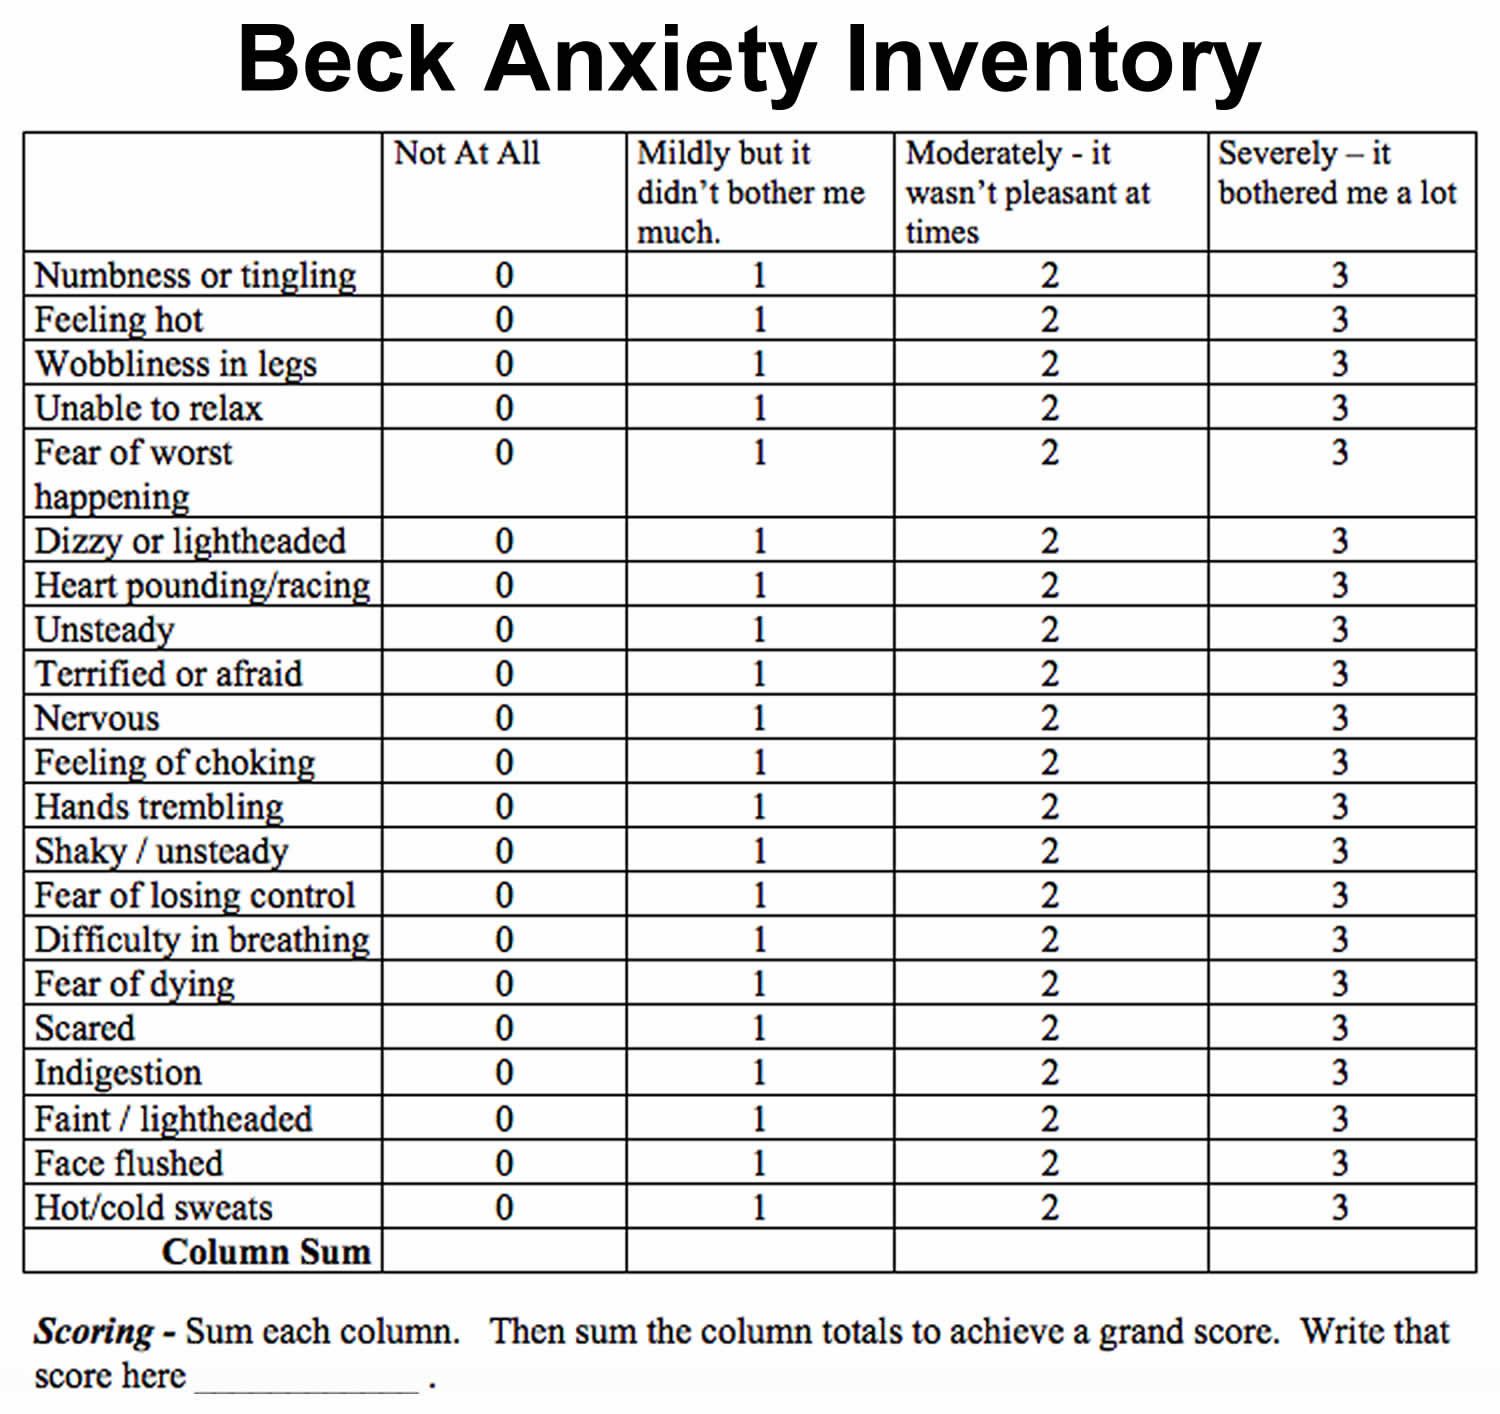 printable-beck-anxiety-inventory-screening-tool-printable-word-searches